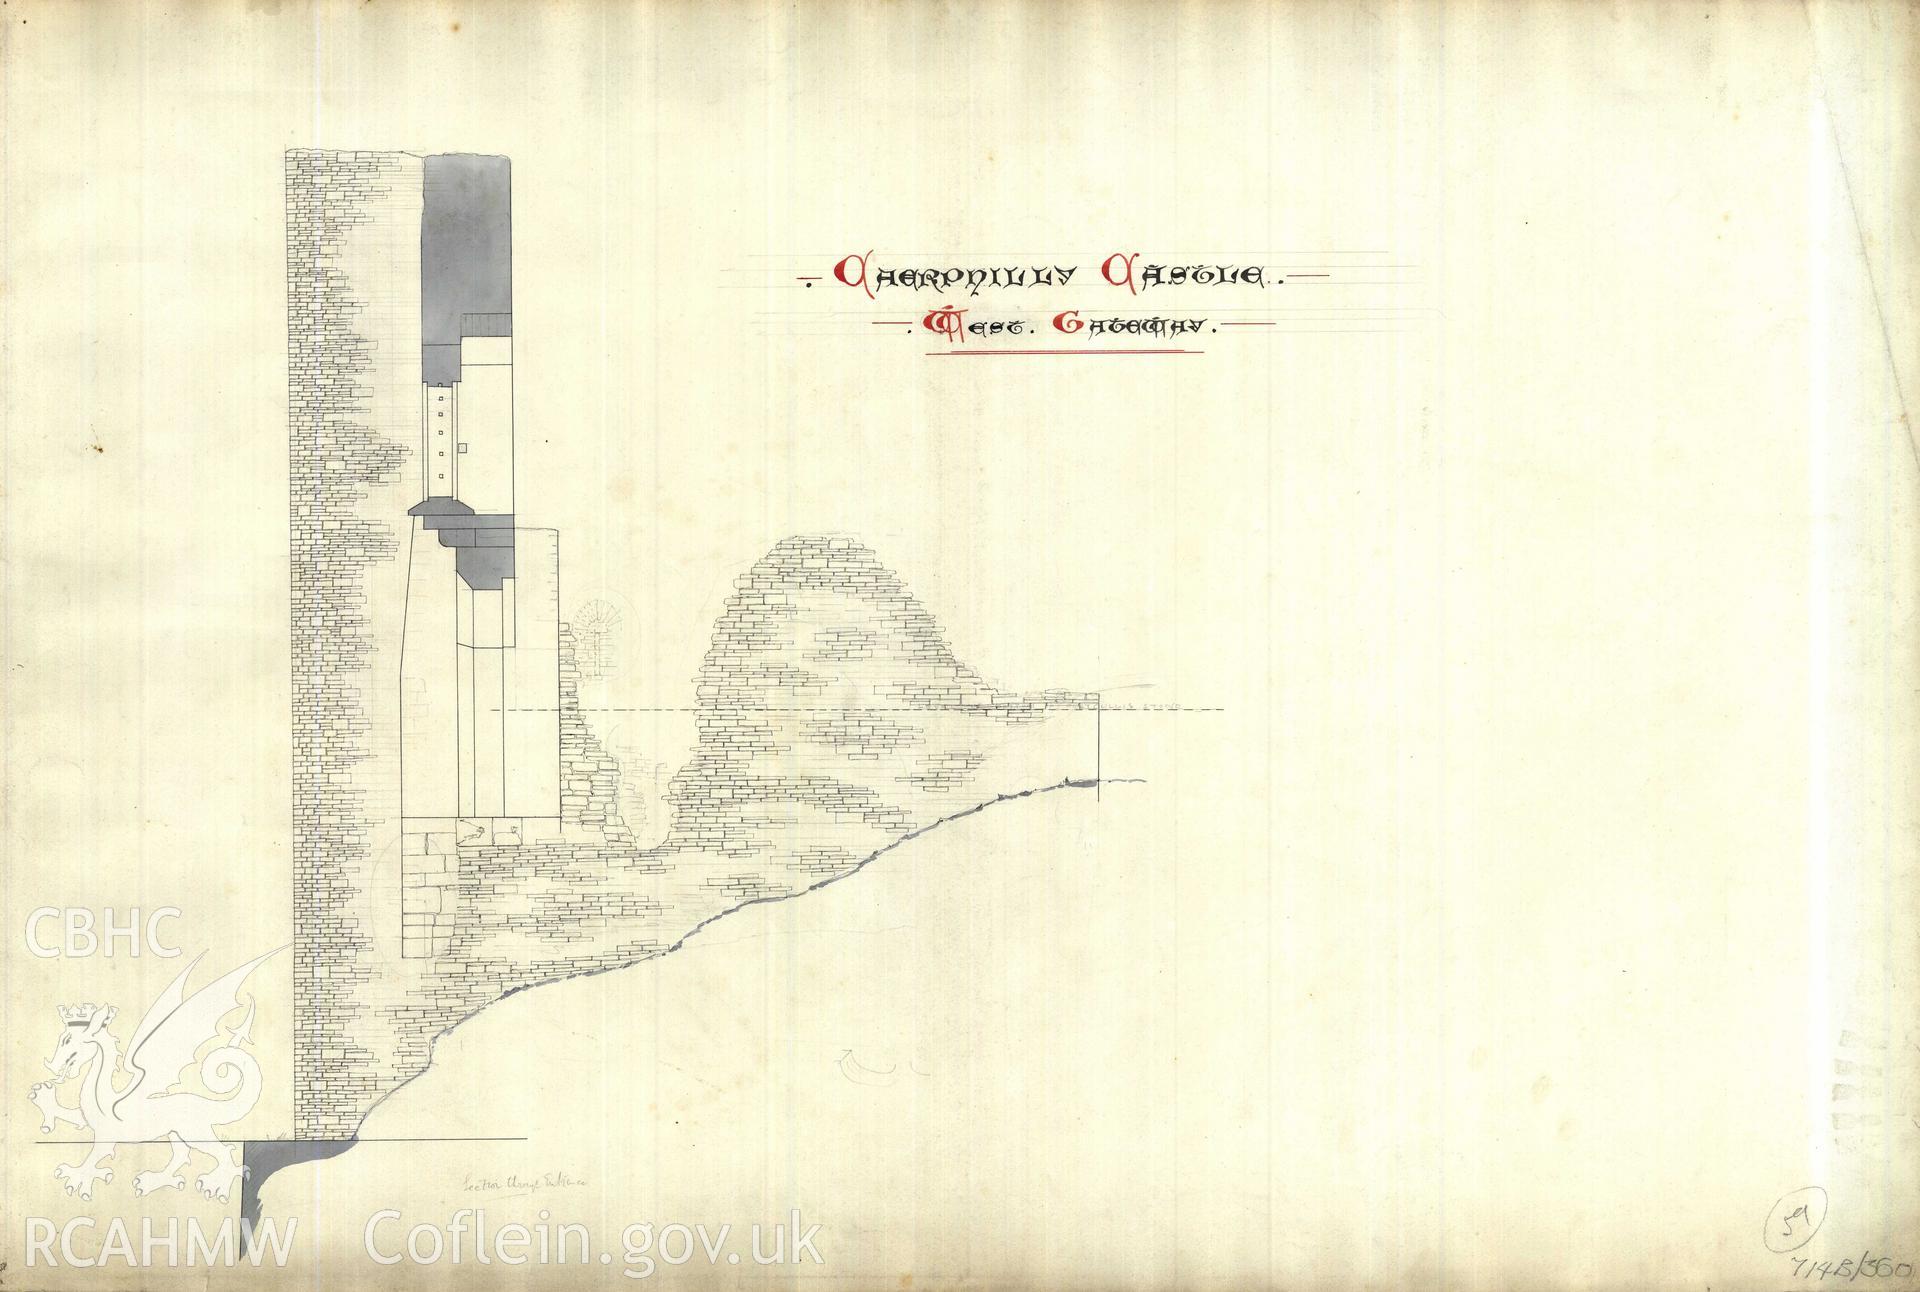 Cadw guardianship monument drawing of Caerphilly Castle. Mid W gate, section looking N. Cadw Ref. No:714B/360. Scale 1:24.